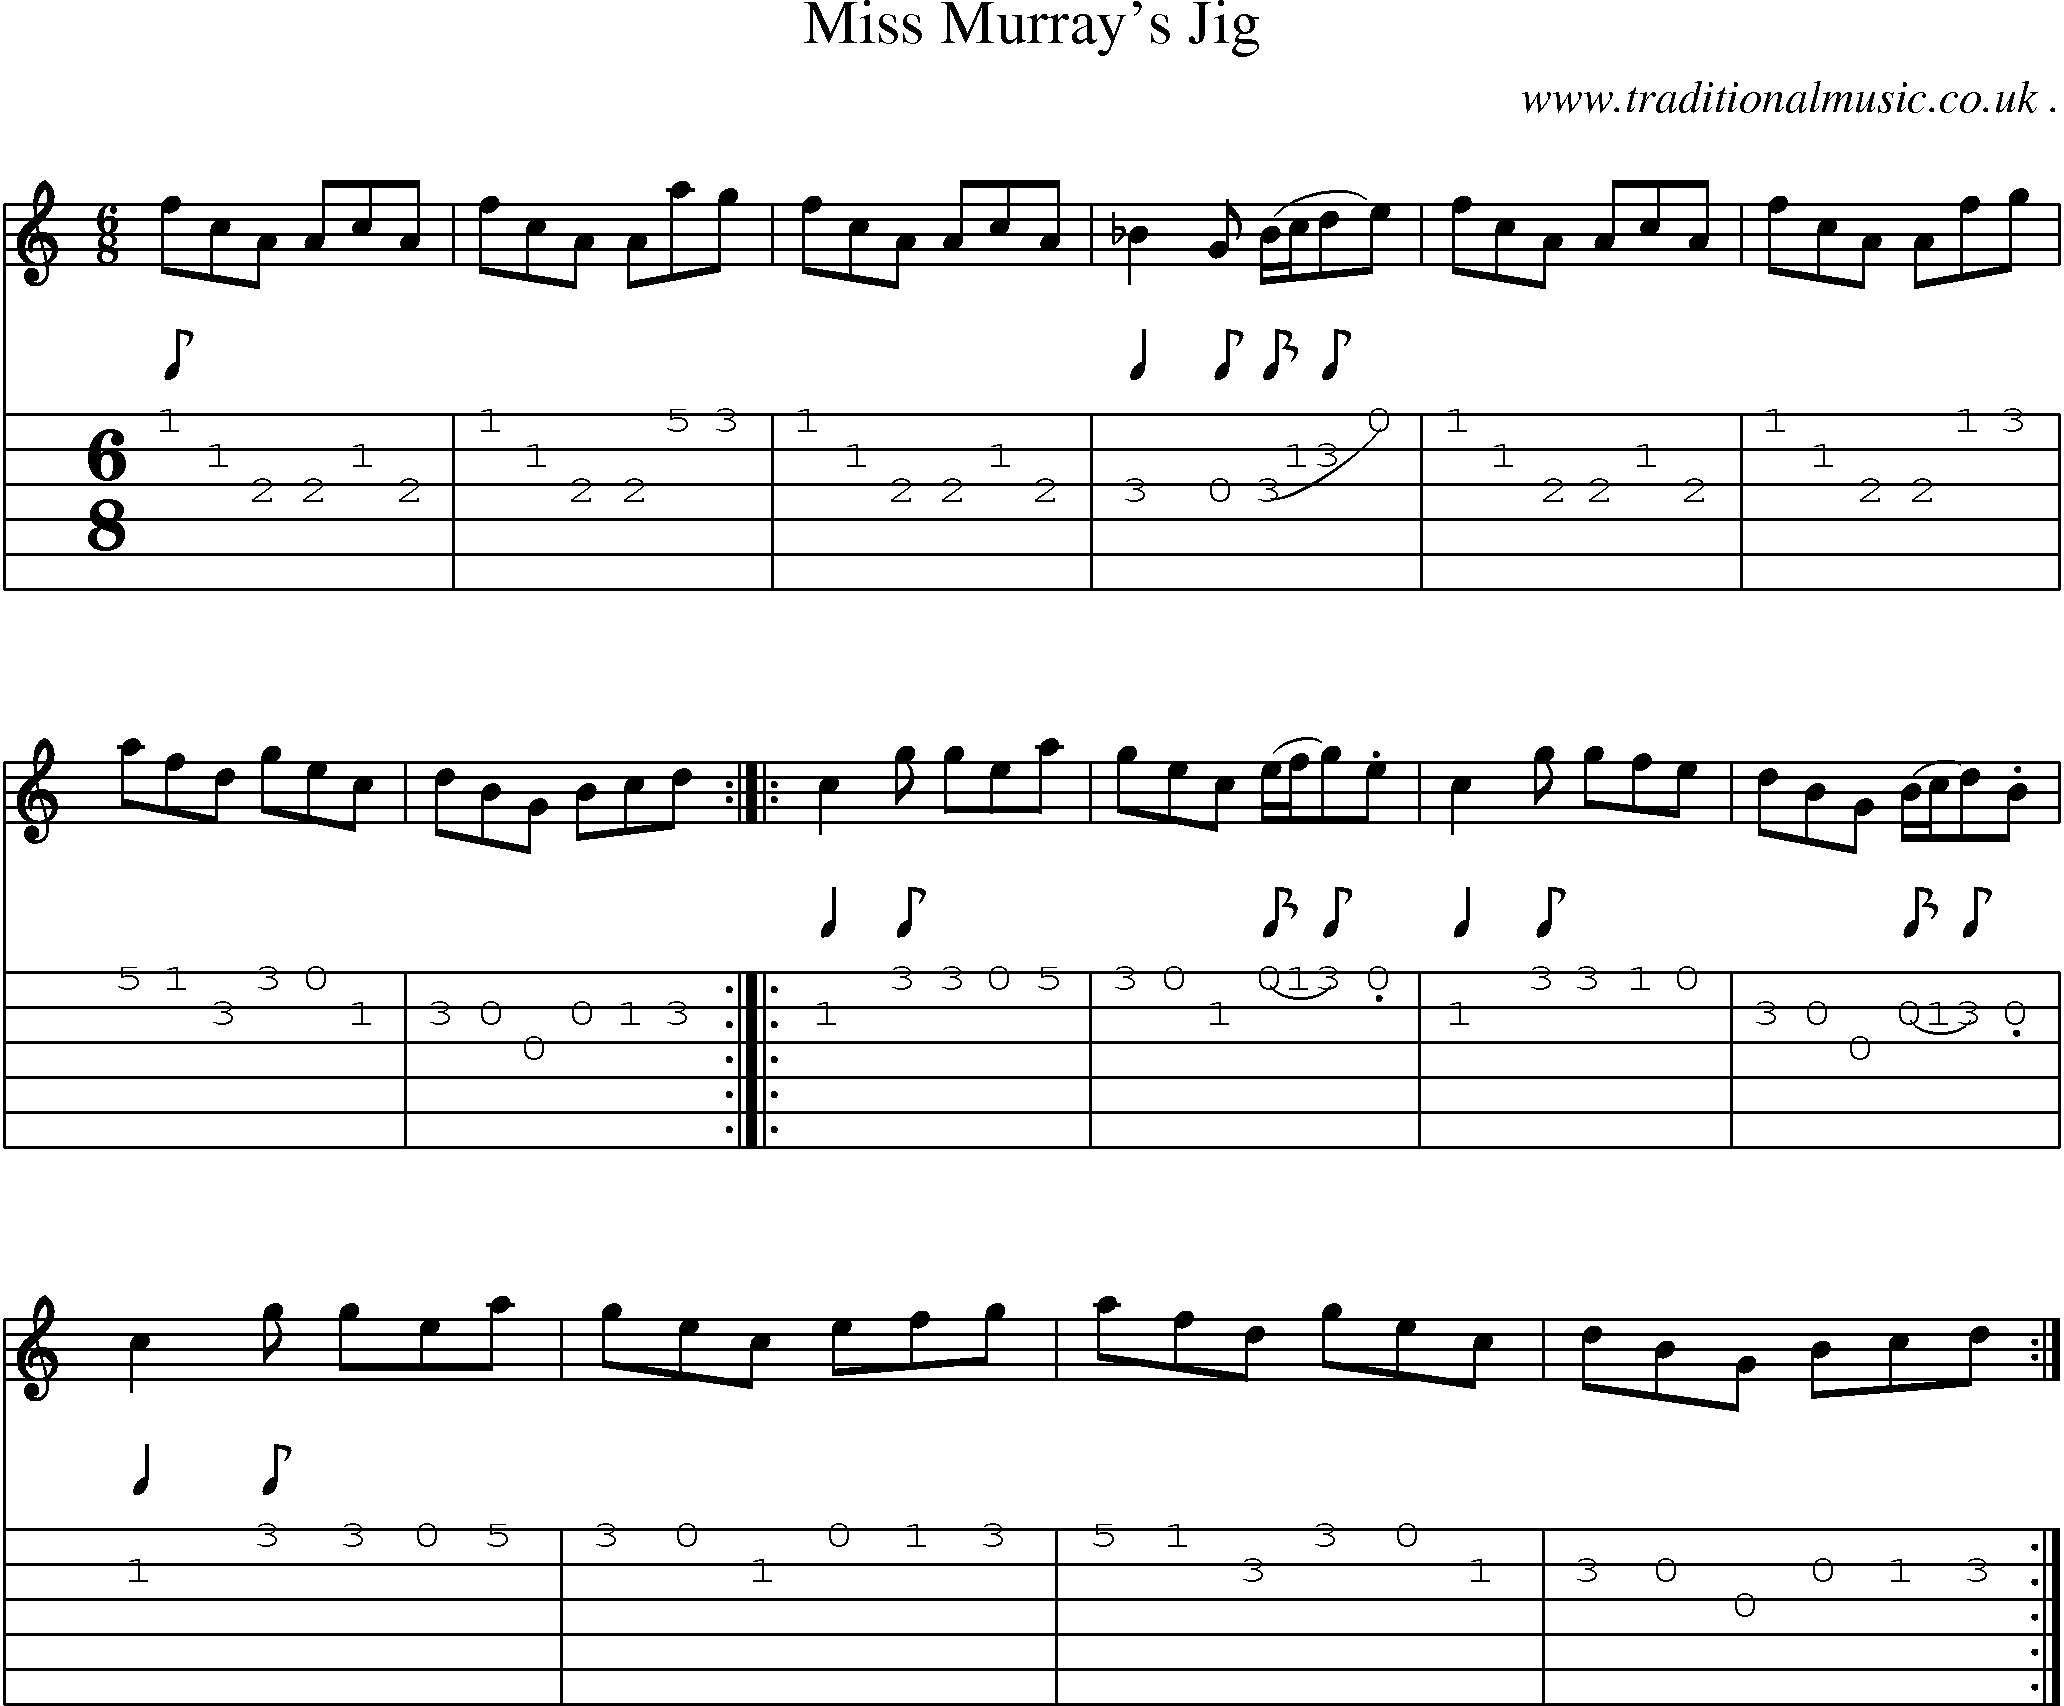 Sheet-Music and Guitar Tabs for Miss Murrays Jig